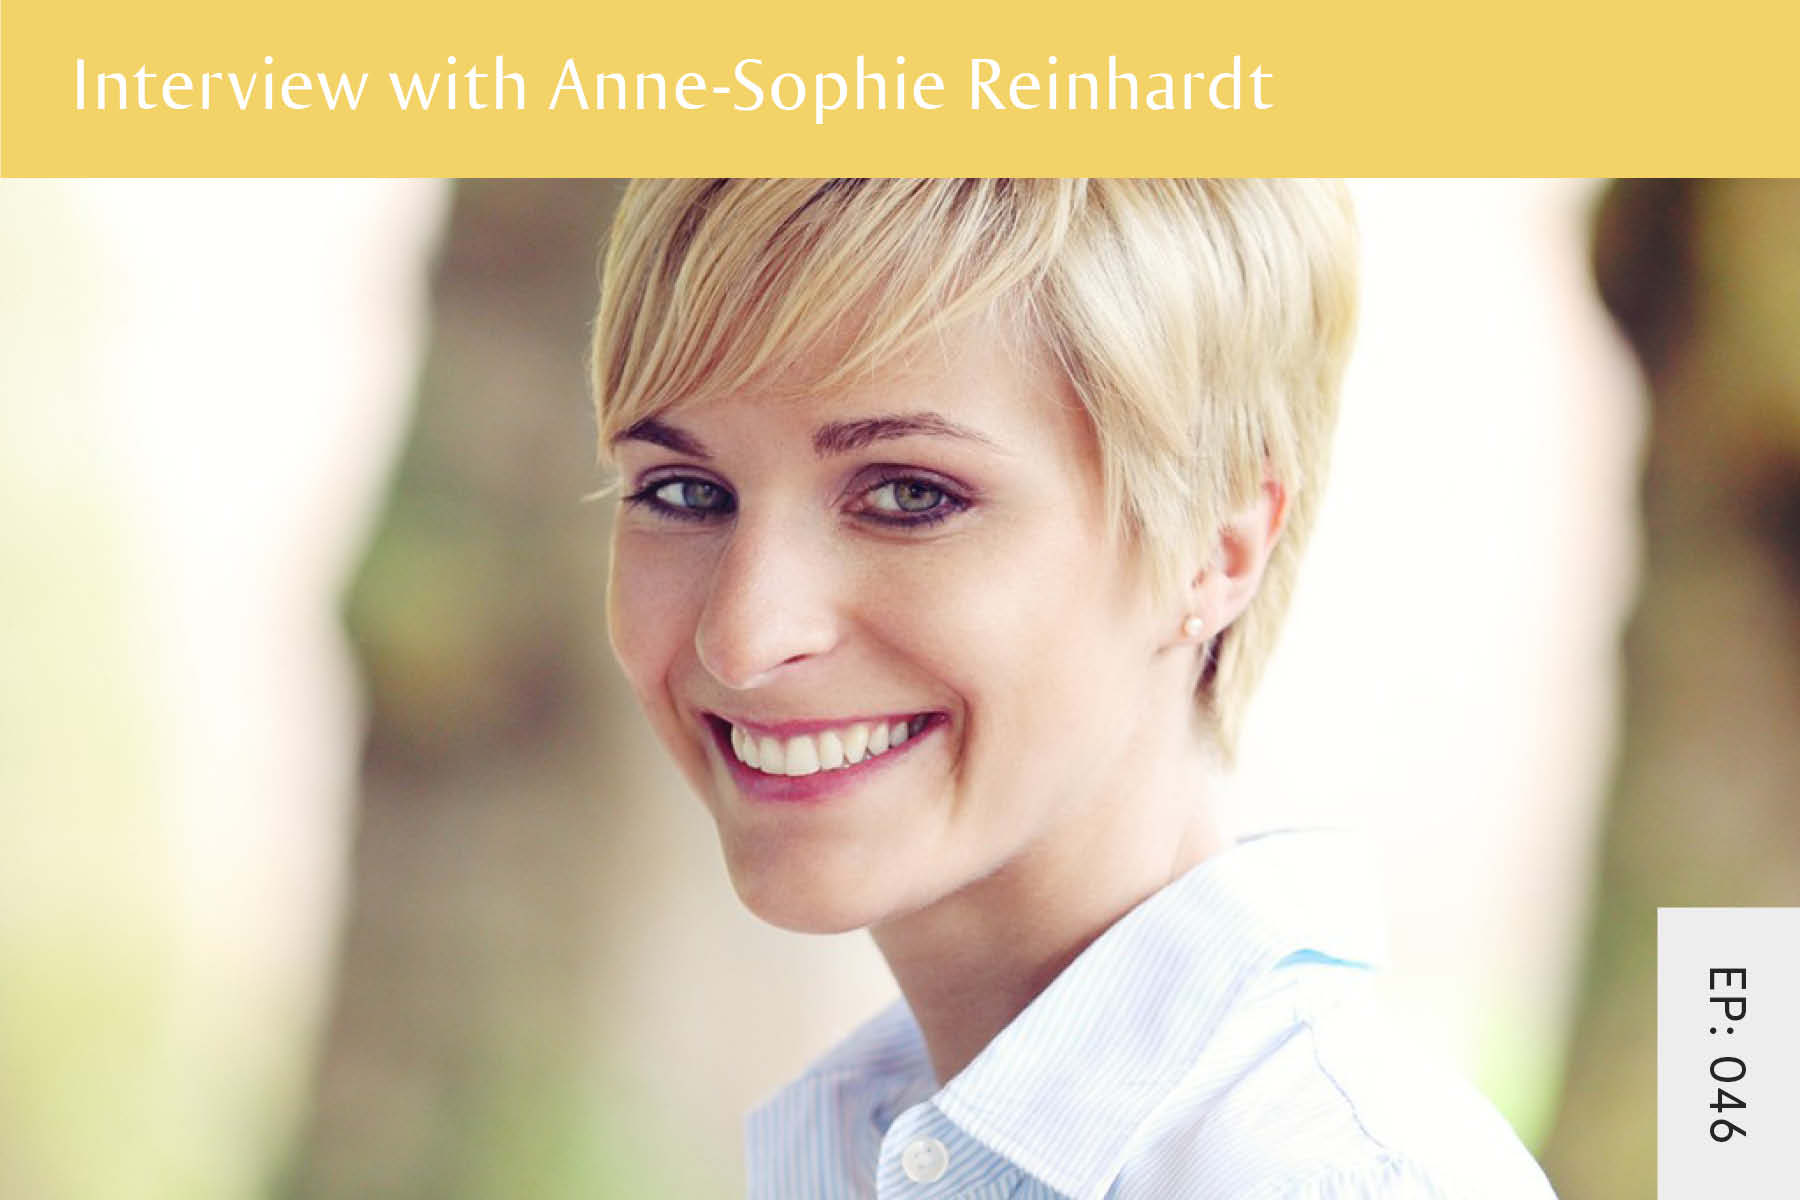 046: Interview with Anne-Sophie Reinhardt - Seven Health: Eating Disorder Recovery and Anti Diet Nutritionist